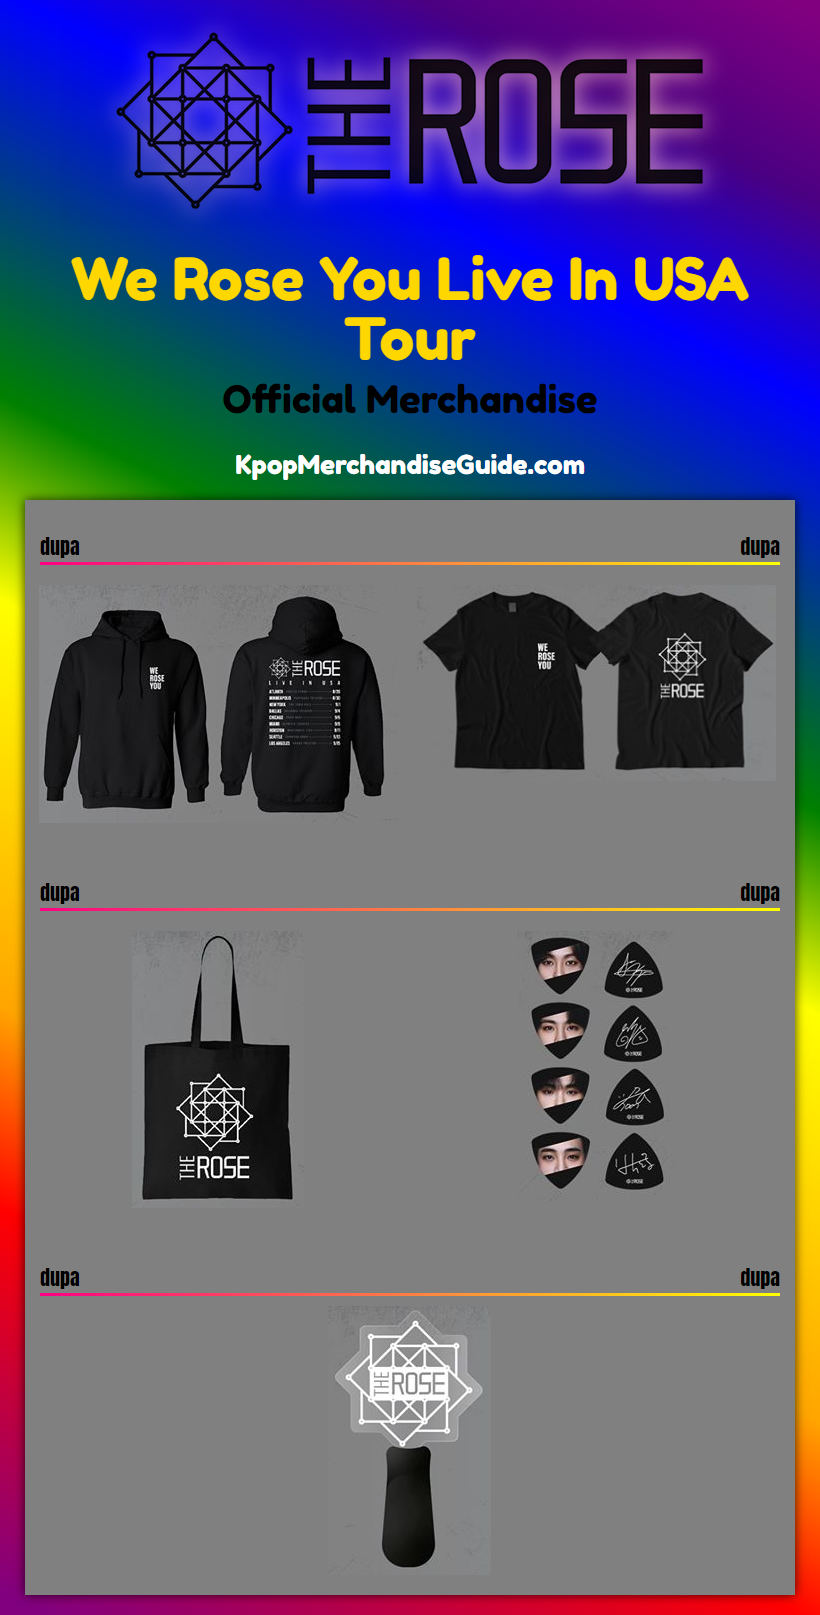 The Rose We Rose You Live In USA Tour Merchandise